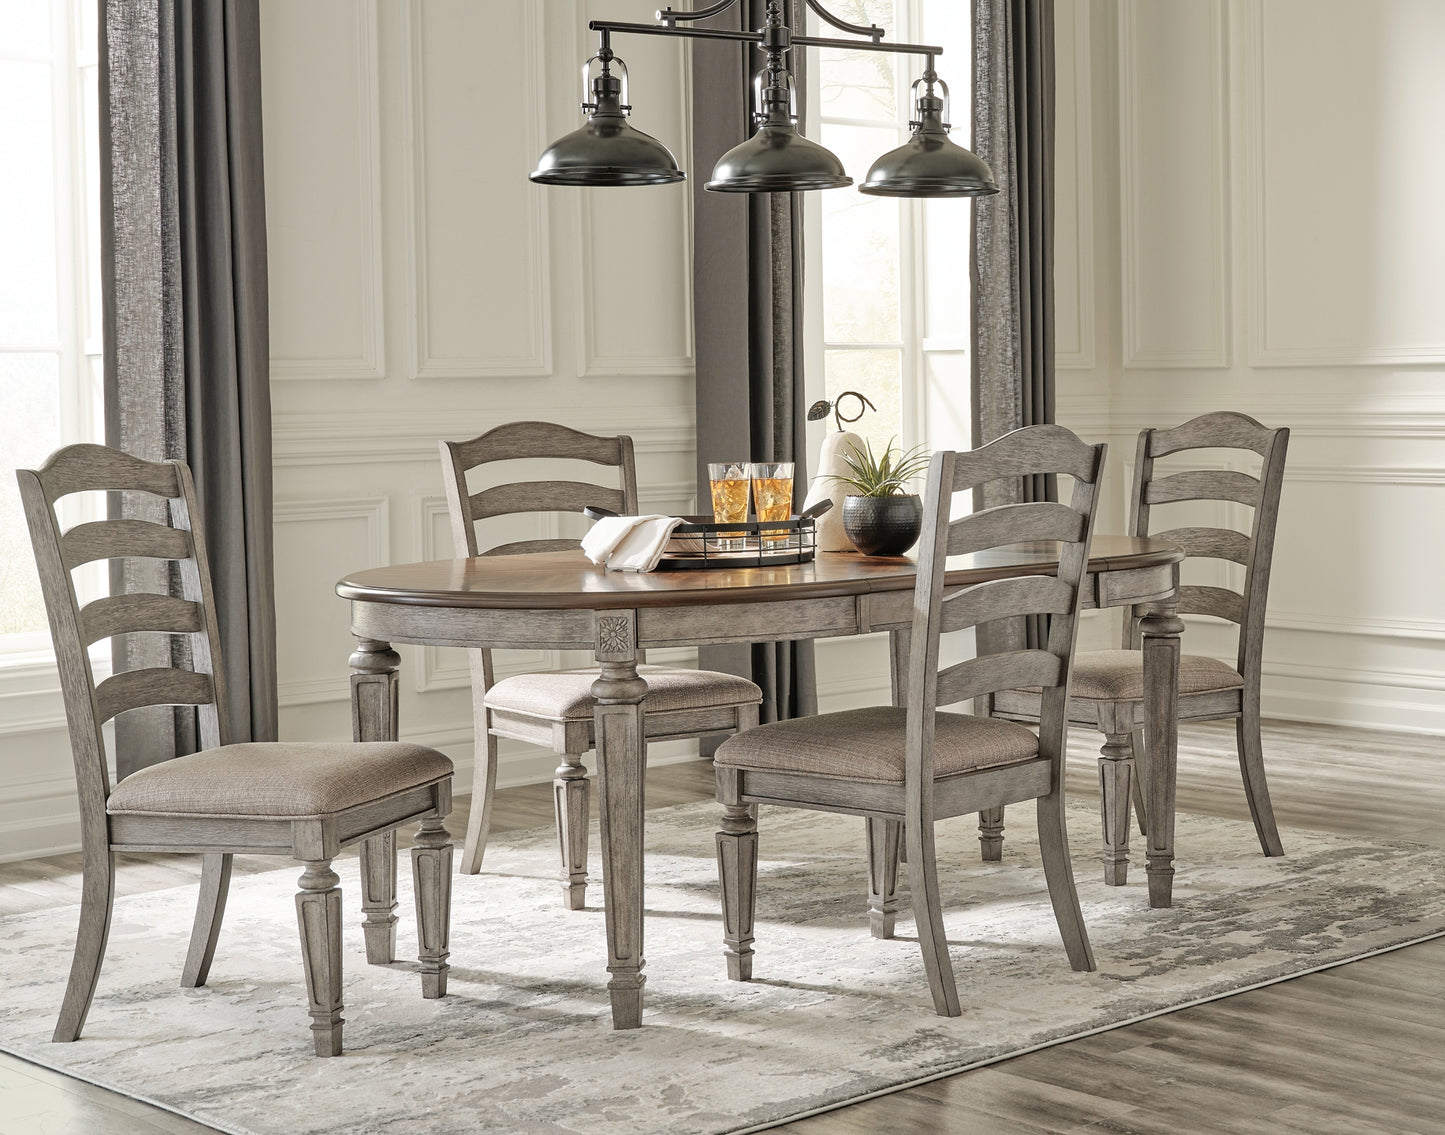 Lodenbay Dining Table and 4 Chairs with Storage Wilson Furniture (OH)  in Bridgeport, Ohio. Serving Bridgeport, Yorkville, Bellaire, & Avondale